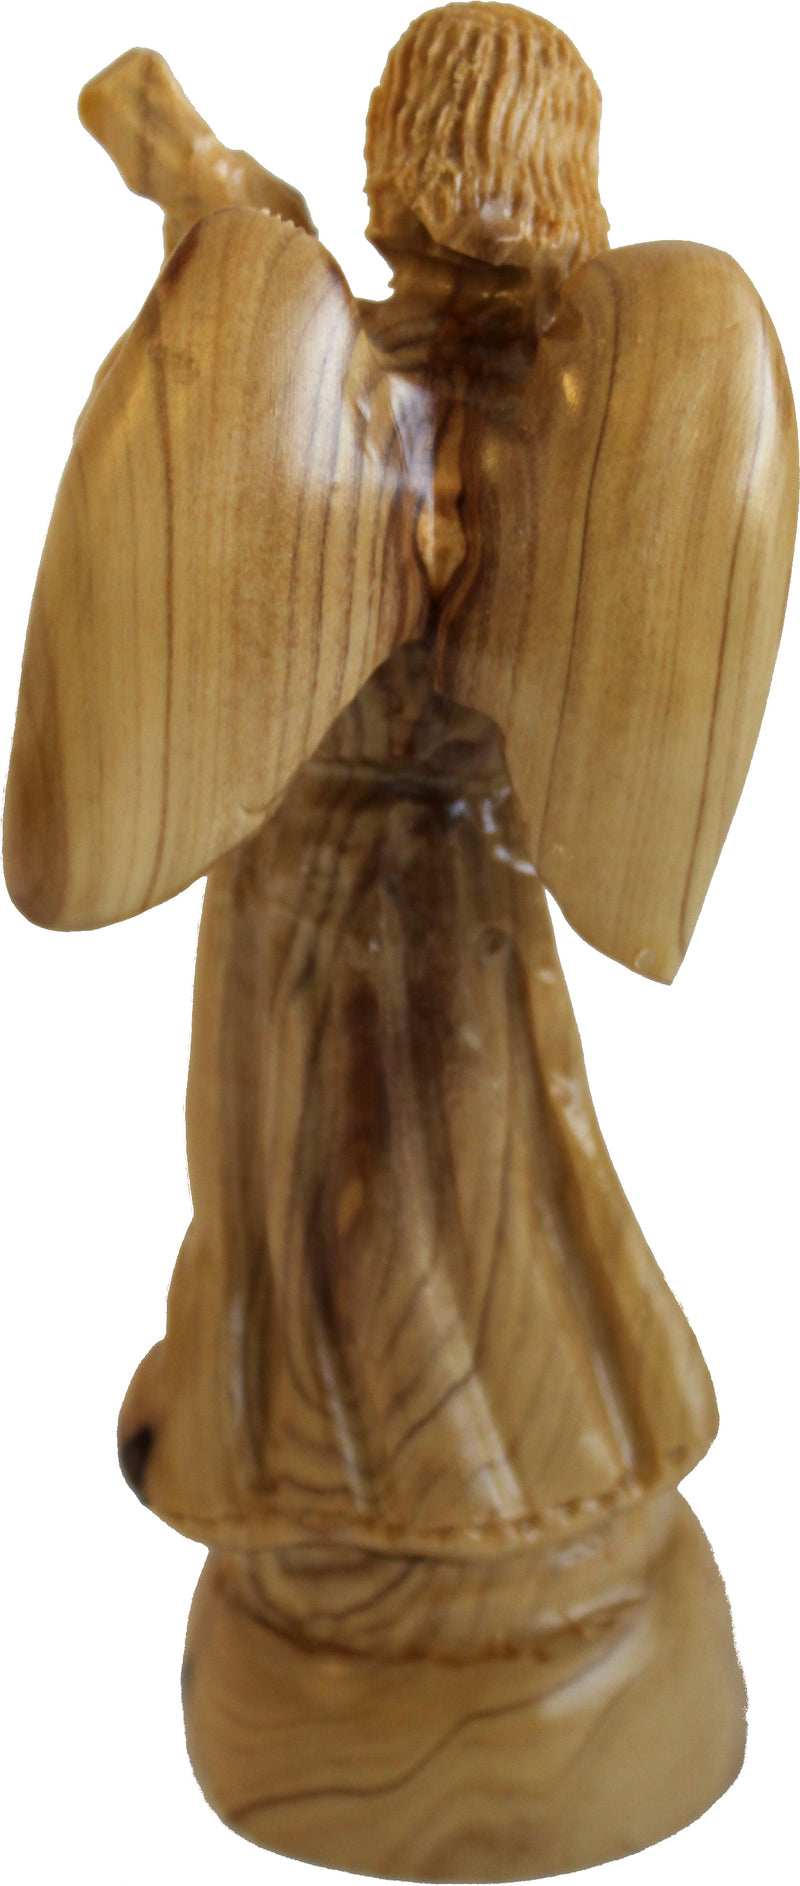 Angel playing music - carved in olive wood , carved faces and details style ( 17.5 cm or 7 Inches )